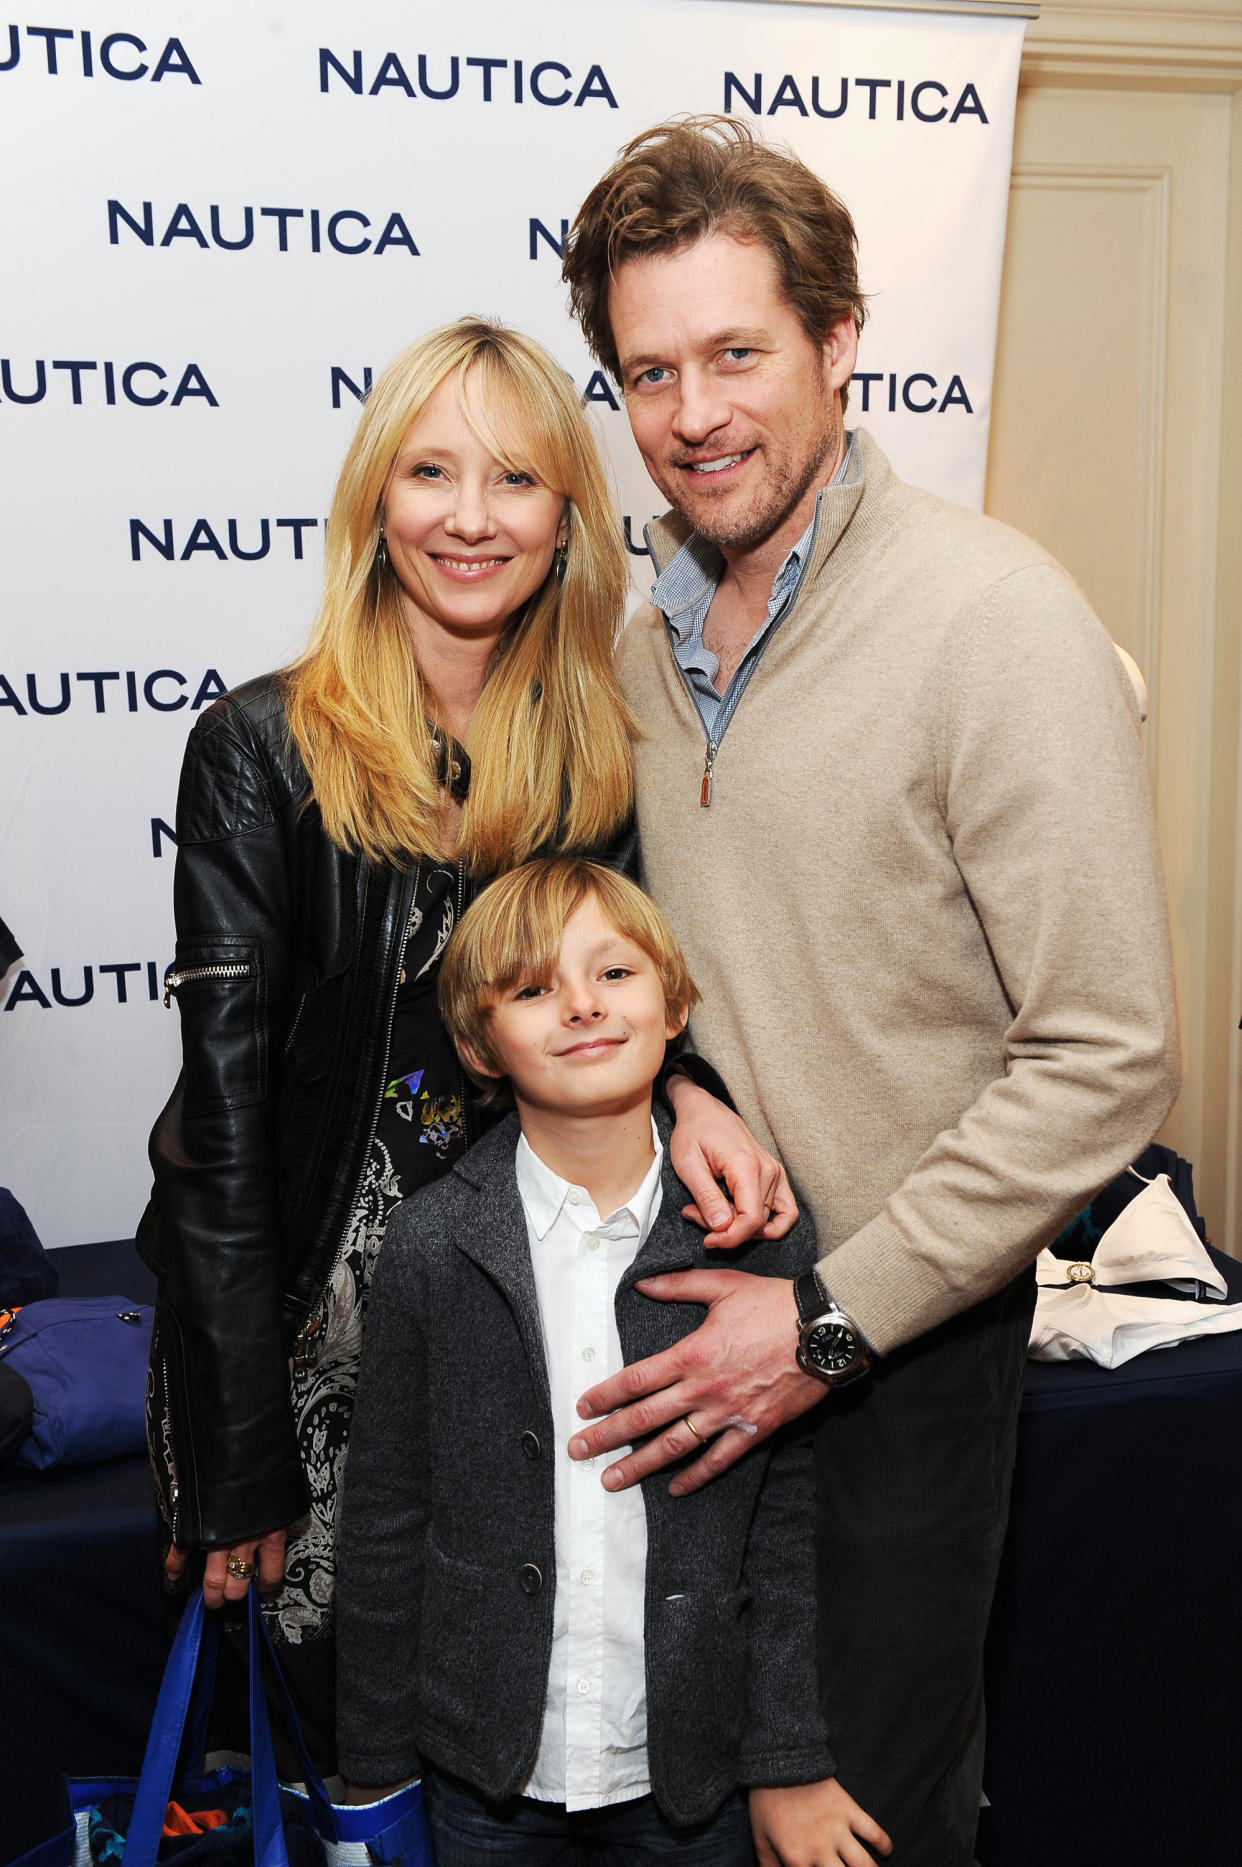 BEVERLY HILLS, CA - JANUARY 14:  (L-R) Actress Anne Heche, Homer Laffoon, and James Tupper attend the HBO Luxury Lounge Featuring L’Oreal Paris And New Era Cap - Day 1 at Four Seasons Hotel Los Angeles on January 14, 2012 in Beverly Hills, California.  (Photo by Michael Kovac/WireImage)